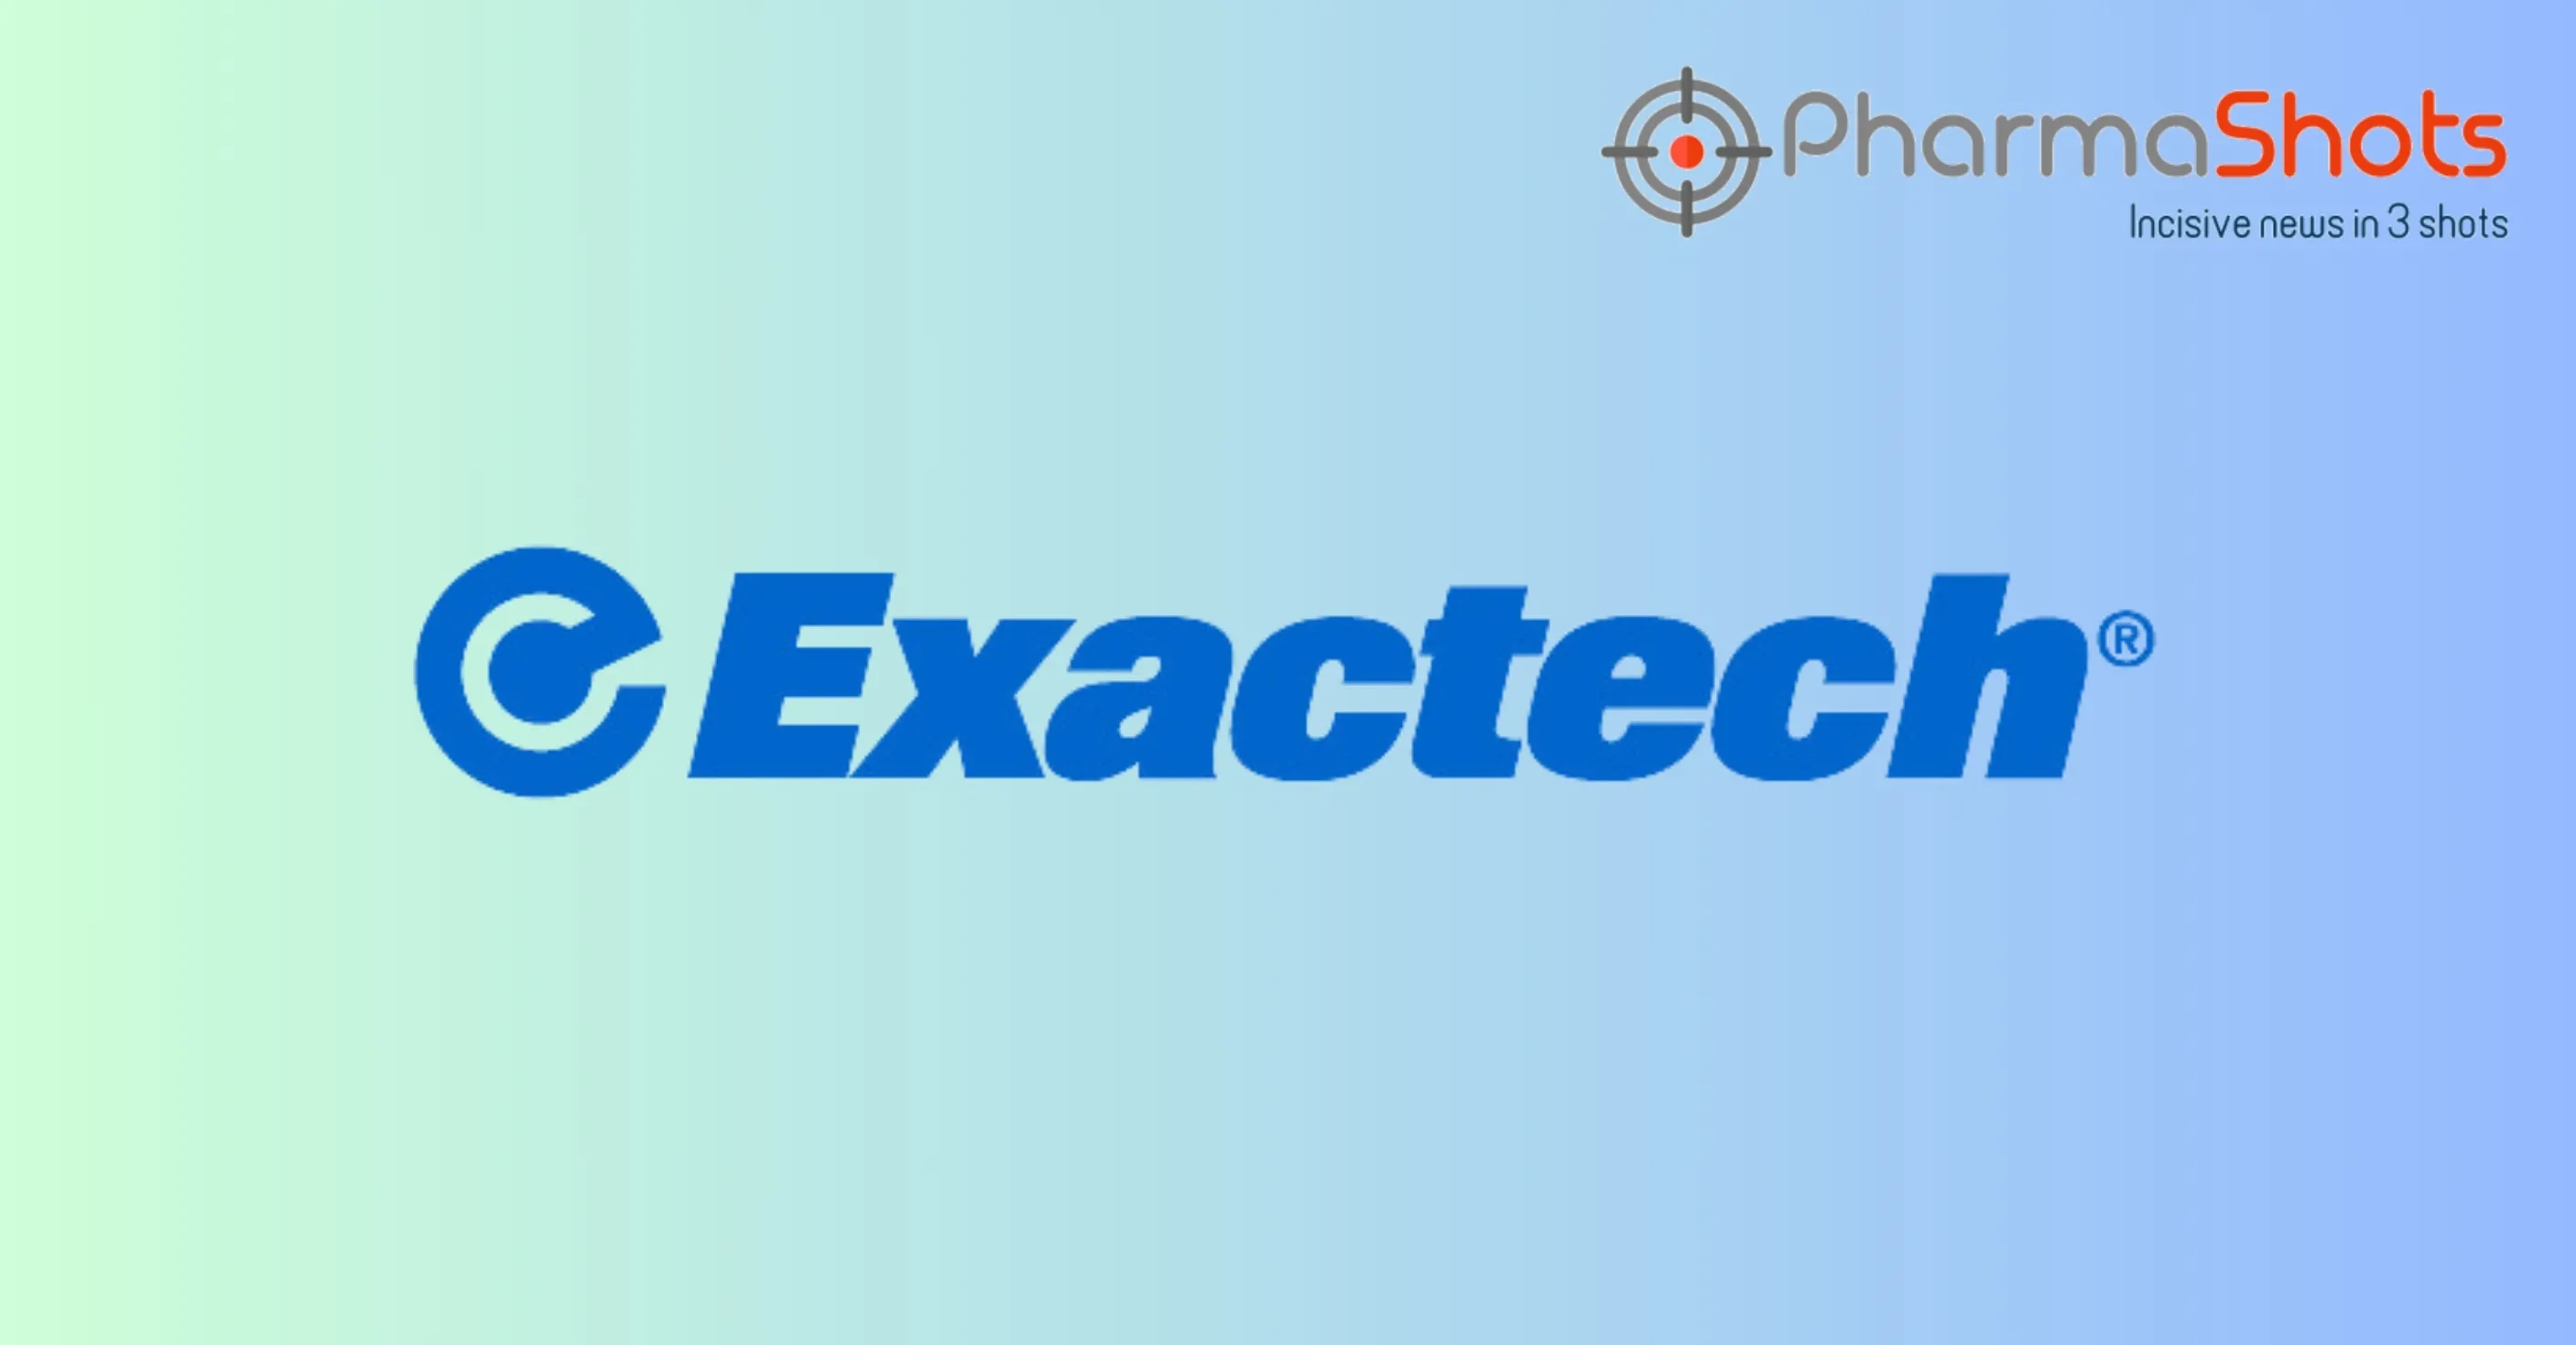 Exactech Reports the US FDA 510(k) Clearance of ExactechGPS Ankle as a Surgical Navigation System for Total Ankle Replacement